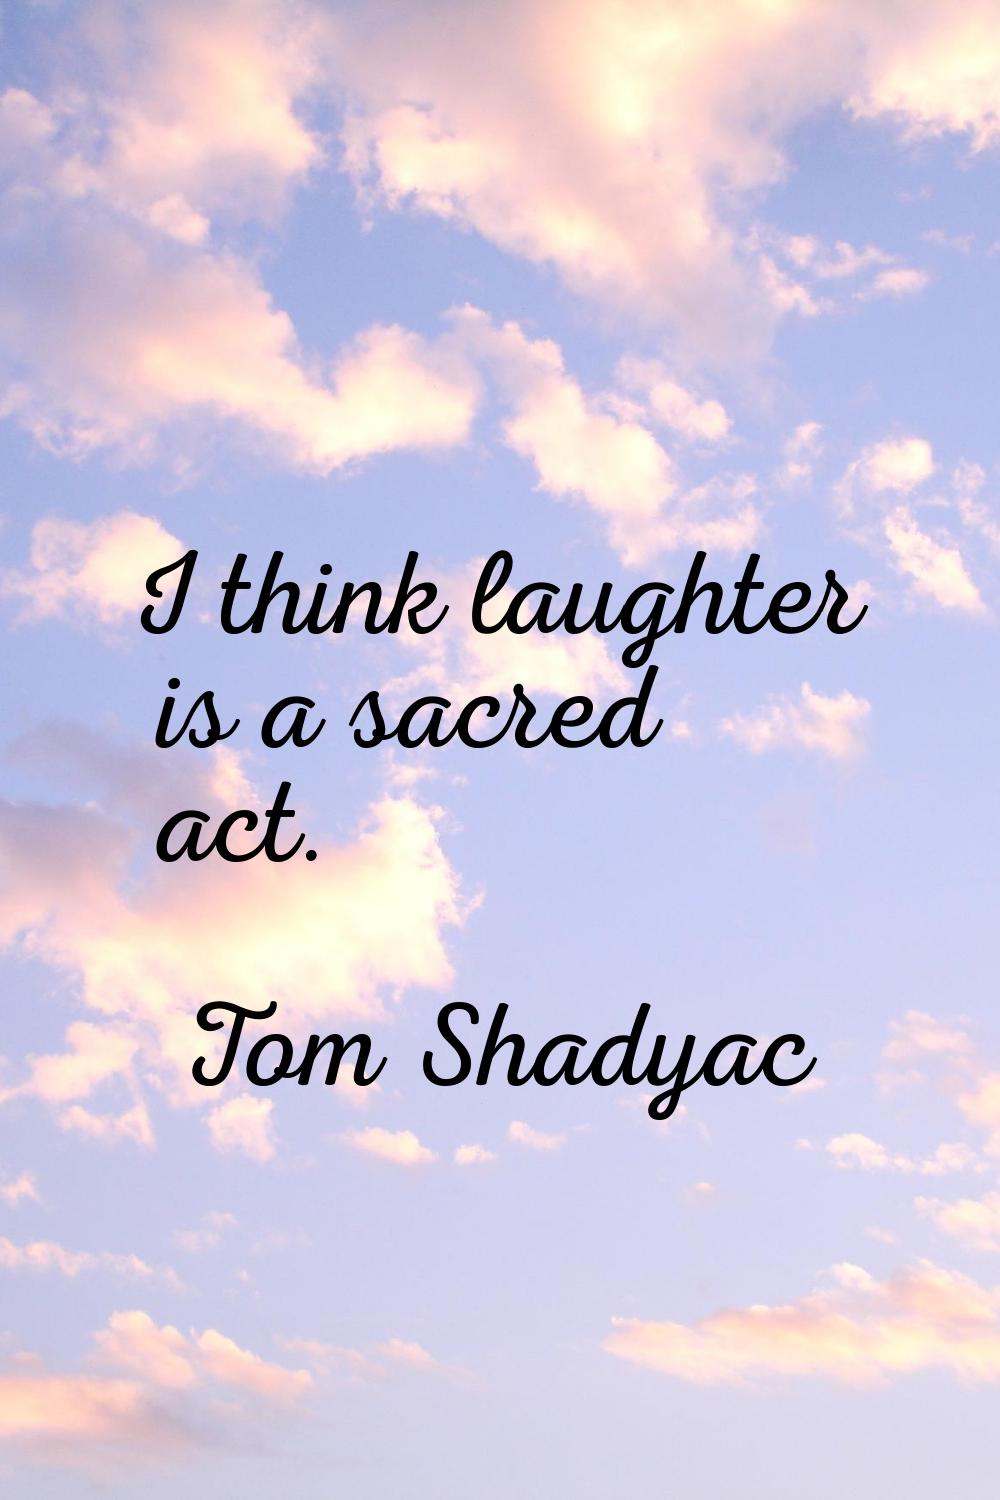 I think laughter is a sacred act.